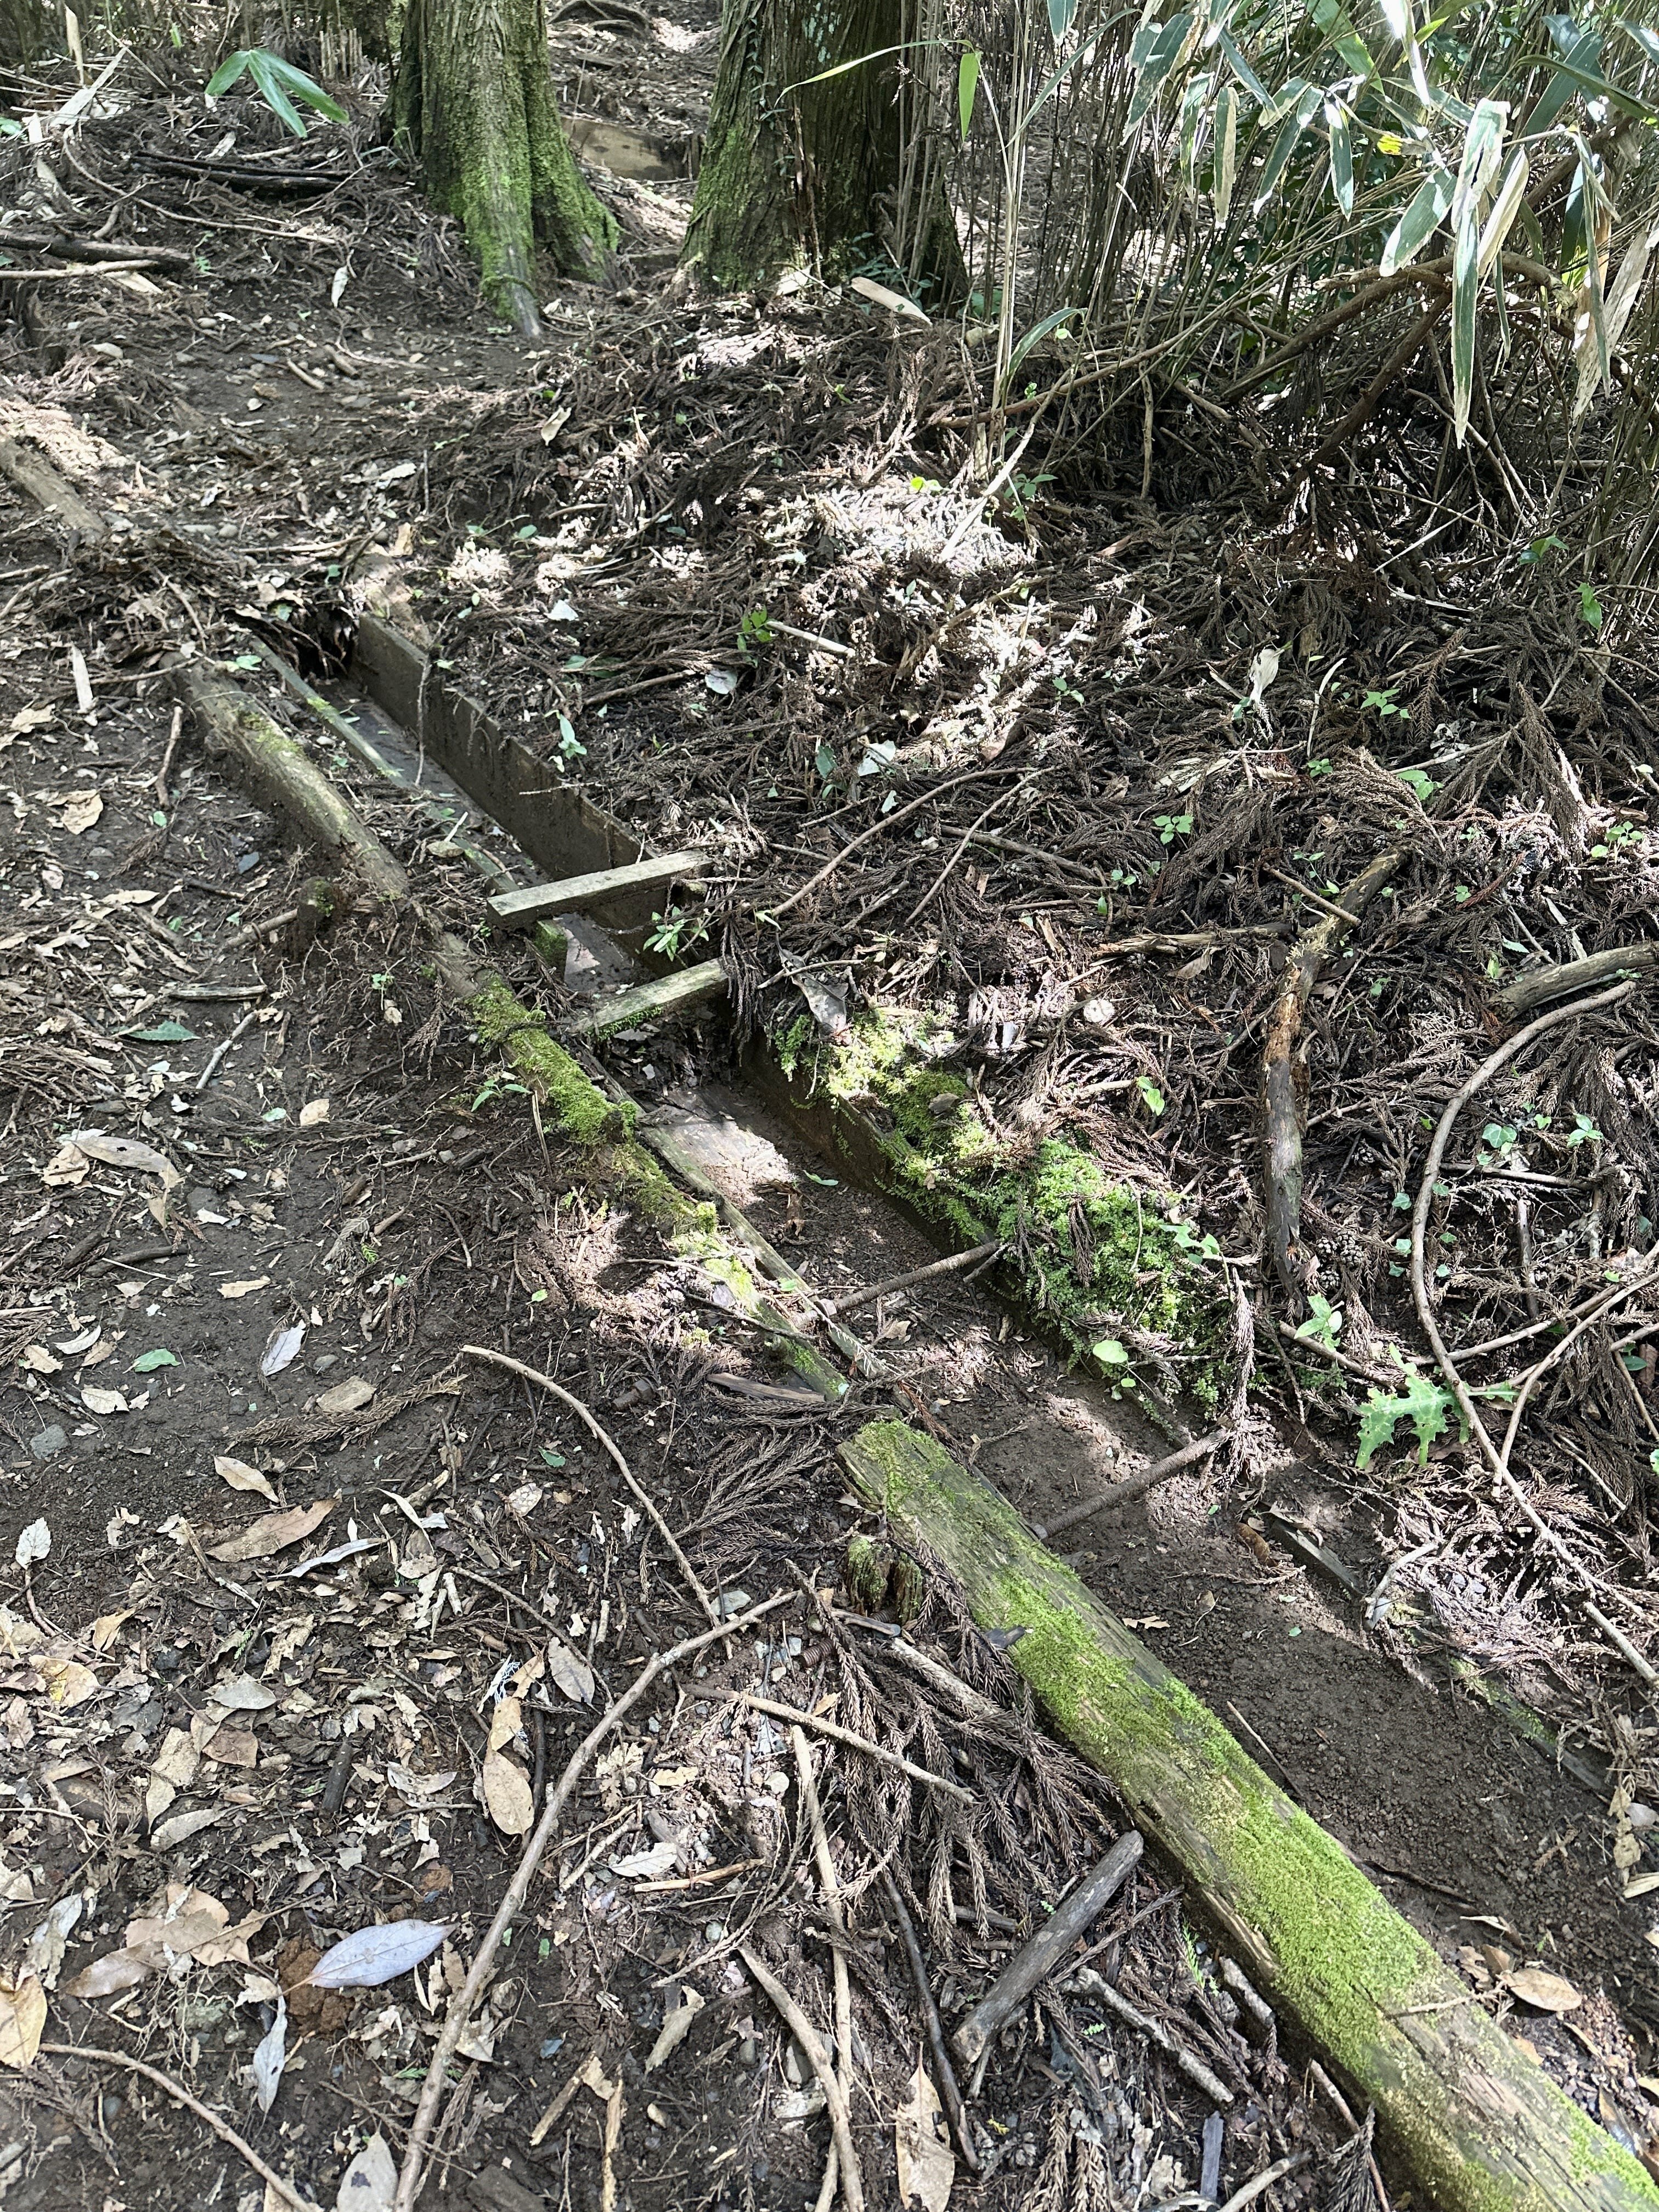 One of many water channels cut across the trail, that you’re asked to scoop a handful of debris from